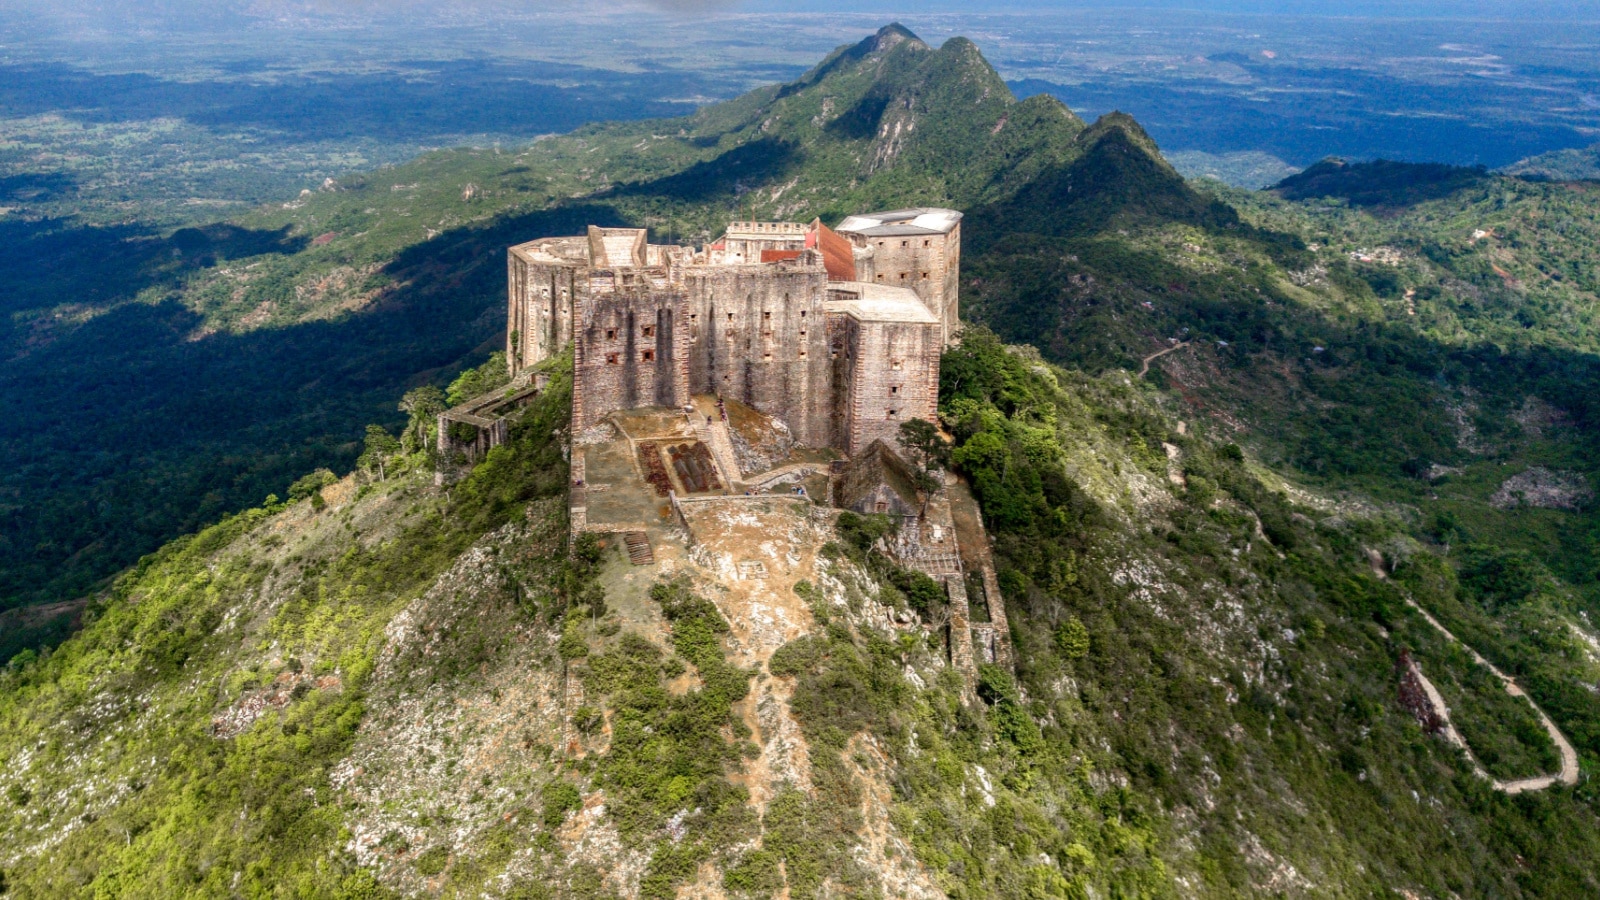 Incredible Aerial View of Citadelle Laferrière and the Surrounding Hills